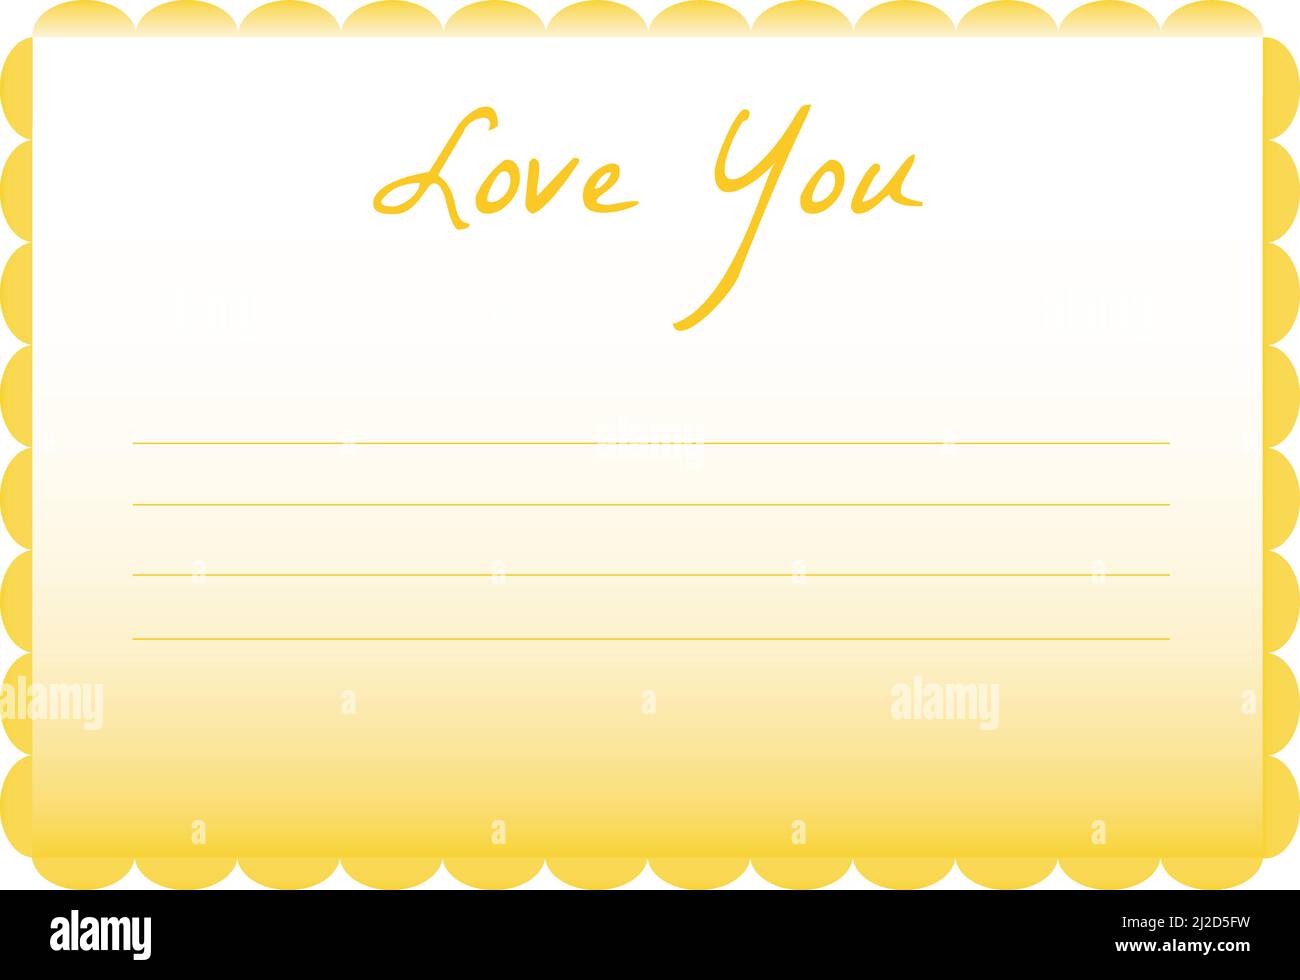 card with yellow scalloped edge and text saying love you Stock Vector